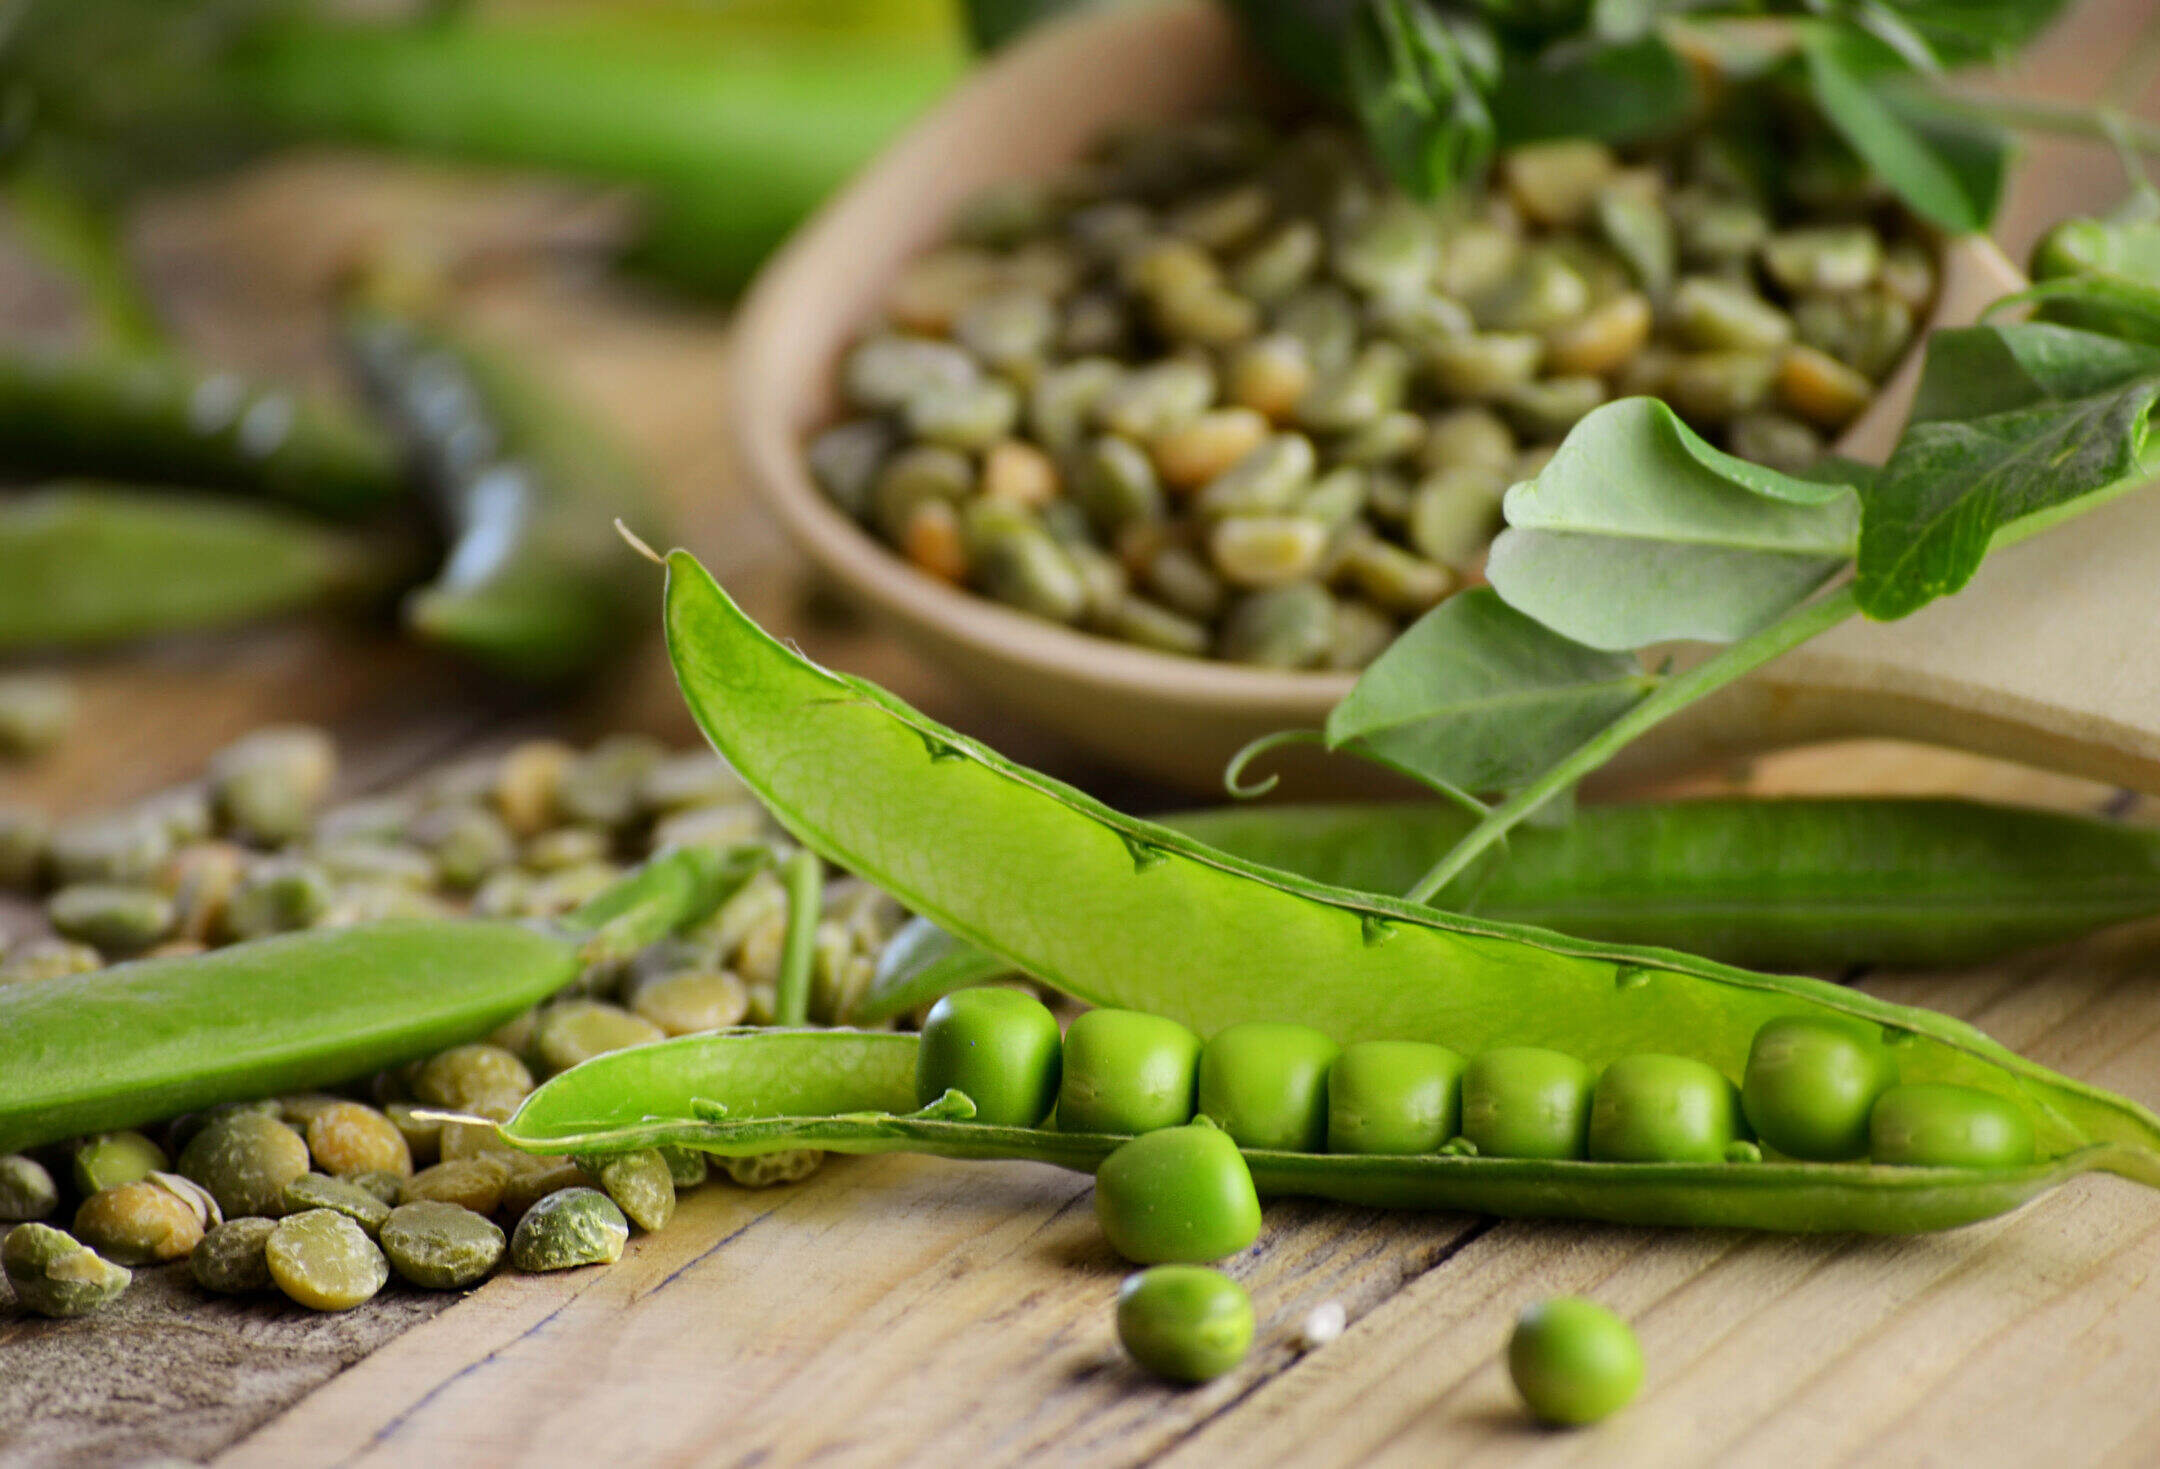 How To Dry Peas For Seed